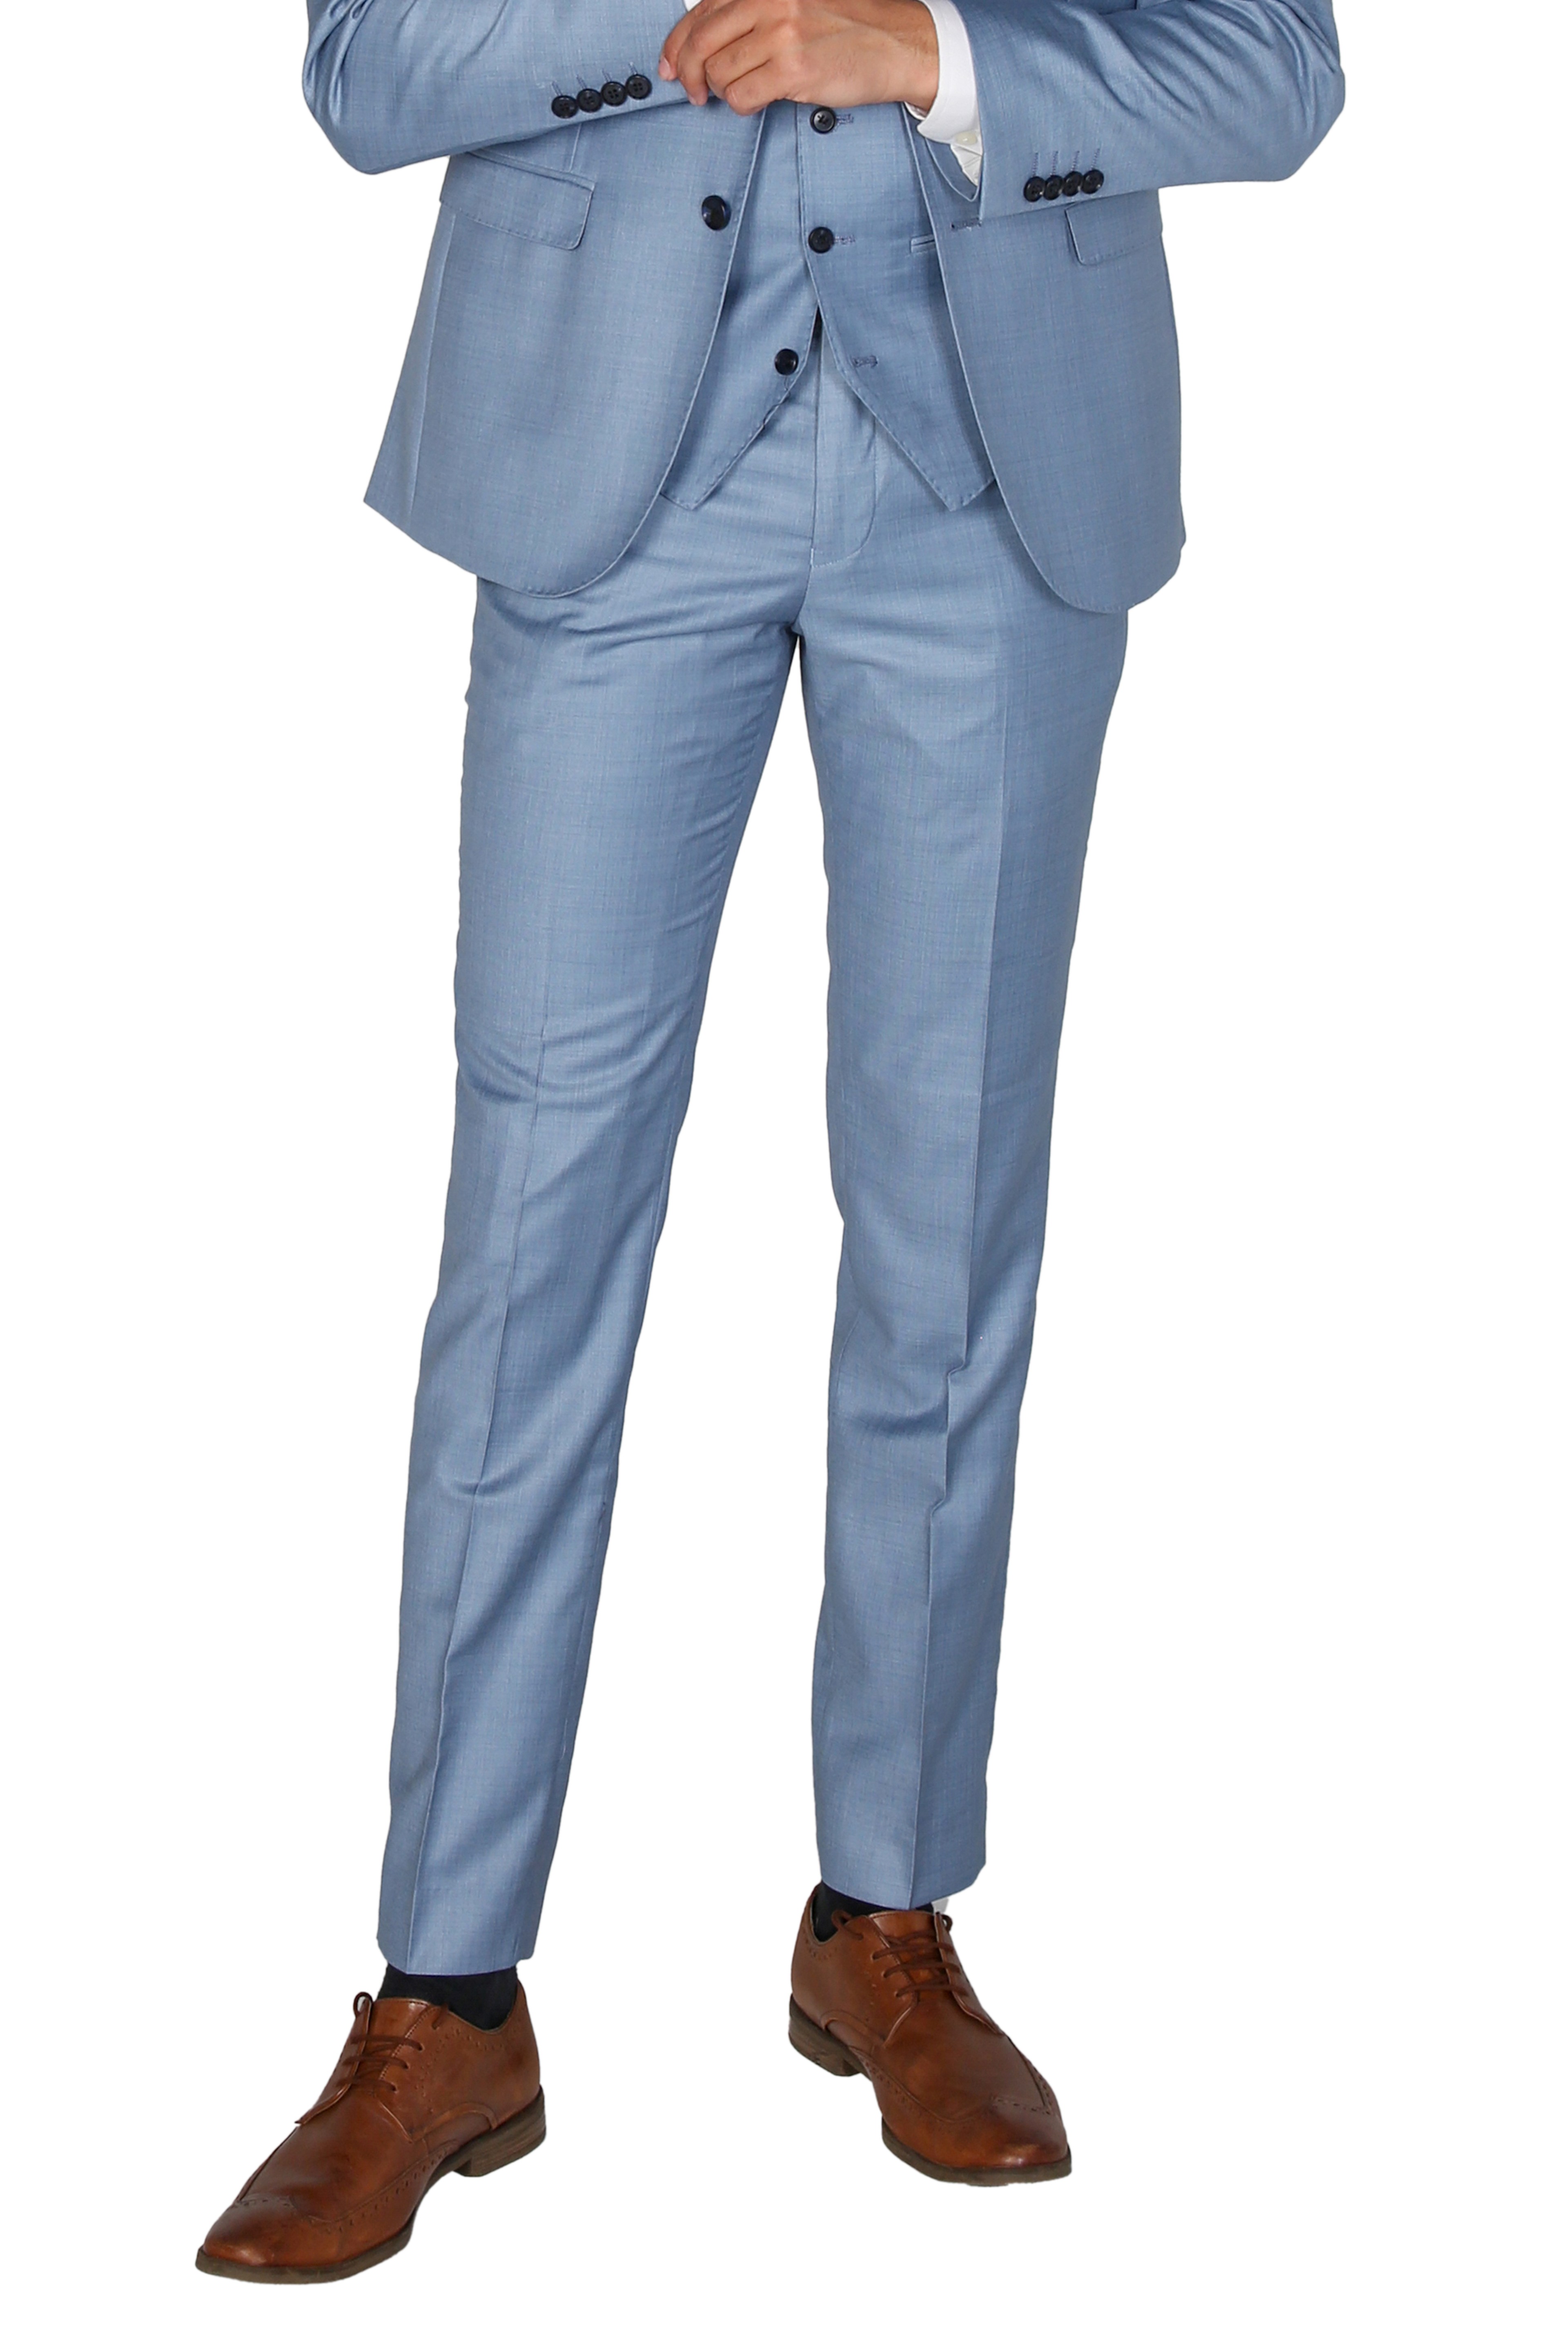 Men's Tailored Fit Formal Trousers  - CHARLES - Blue